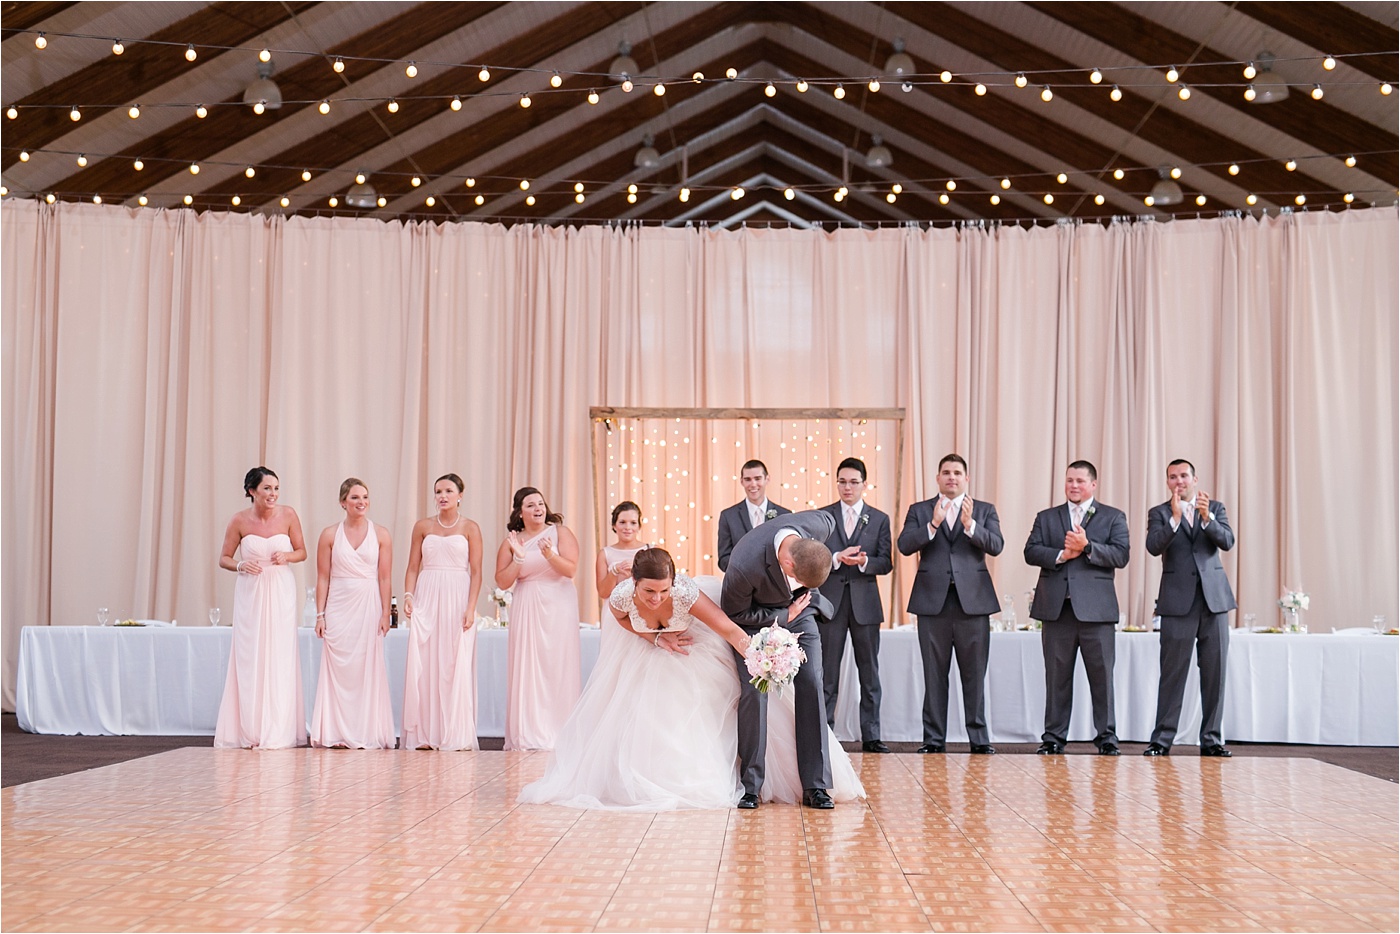 A Blush Outdoor wedding at Irongate Equestrian | KariMe Photography_0169